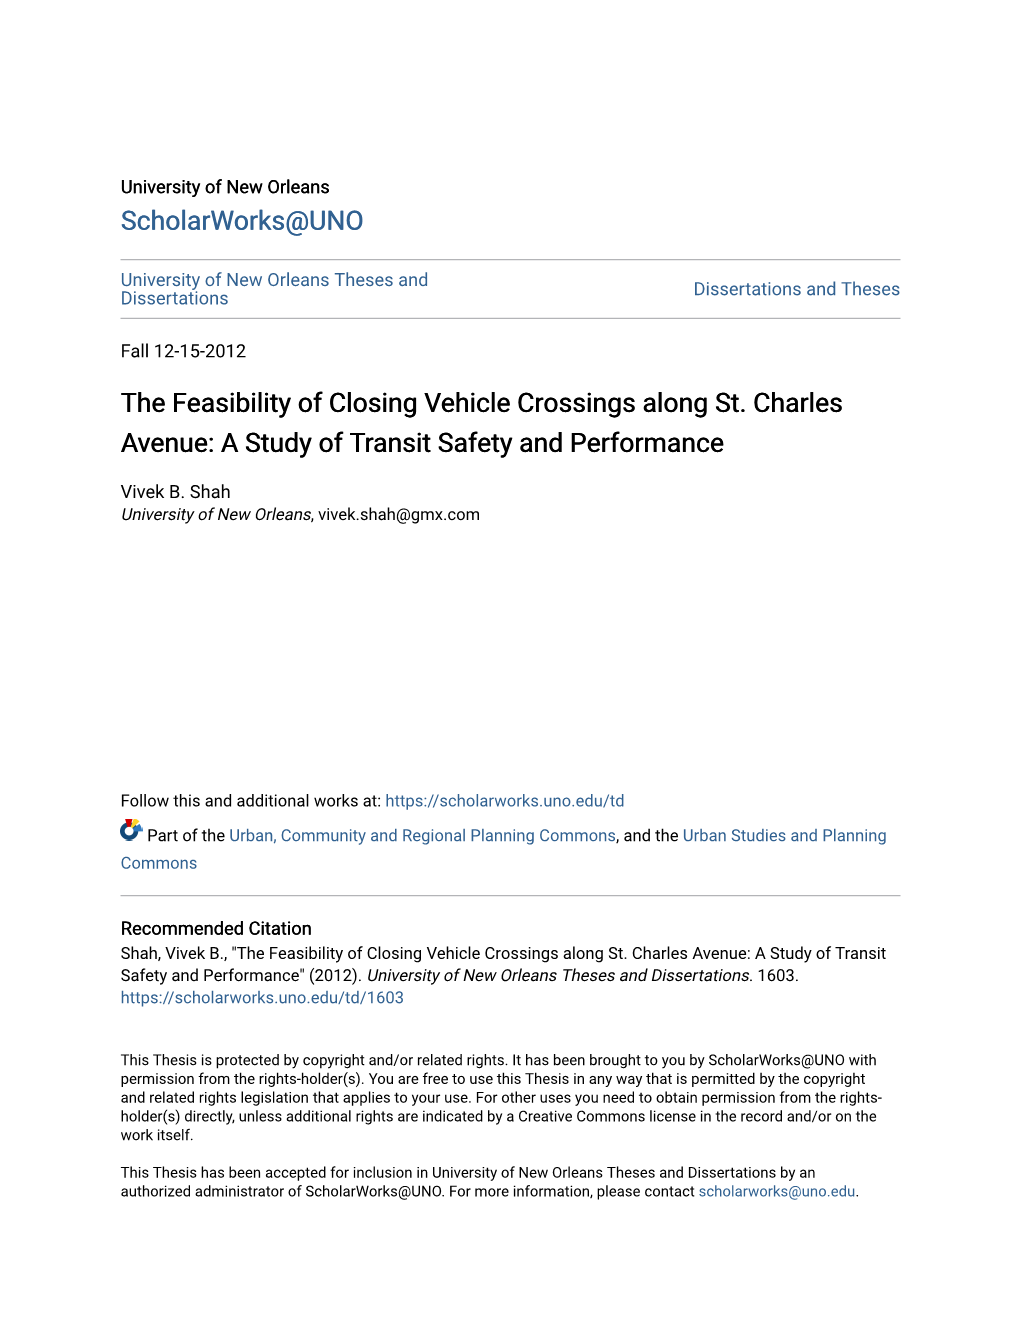 The Feasibility of Closing Vehicle Crossings Along St. Charles Avenue: a Study of Transit Safety and Performance